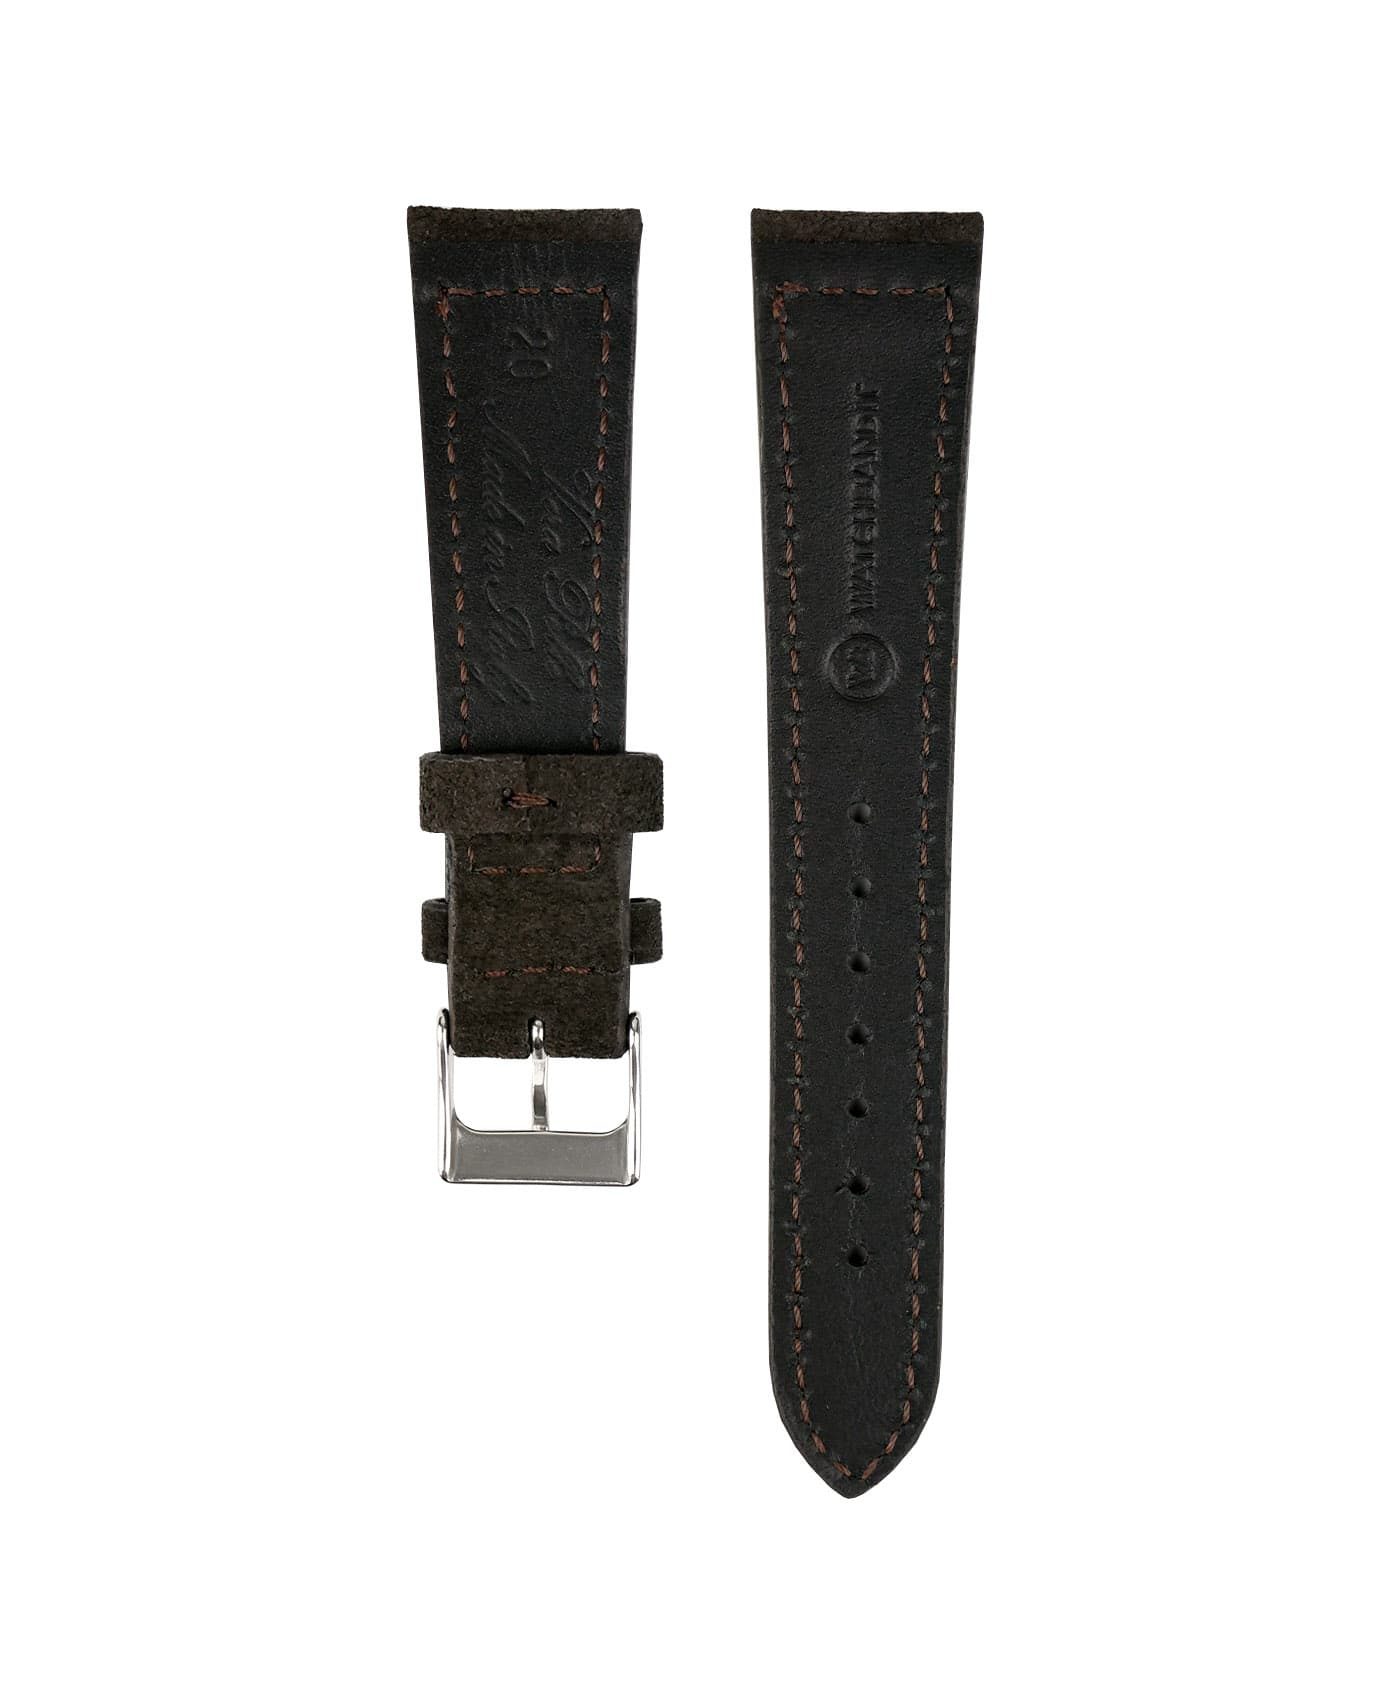 Suede leather strap with side seam_dark brown_back